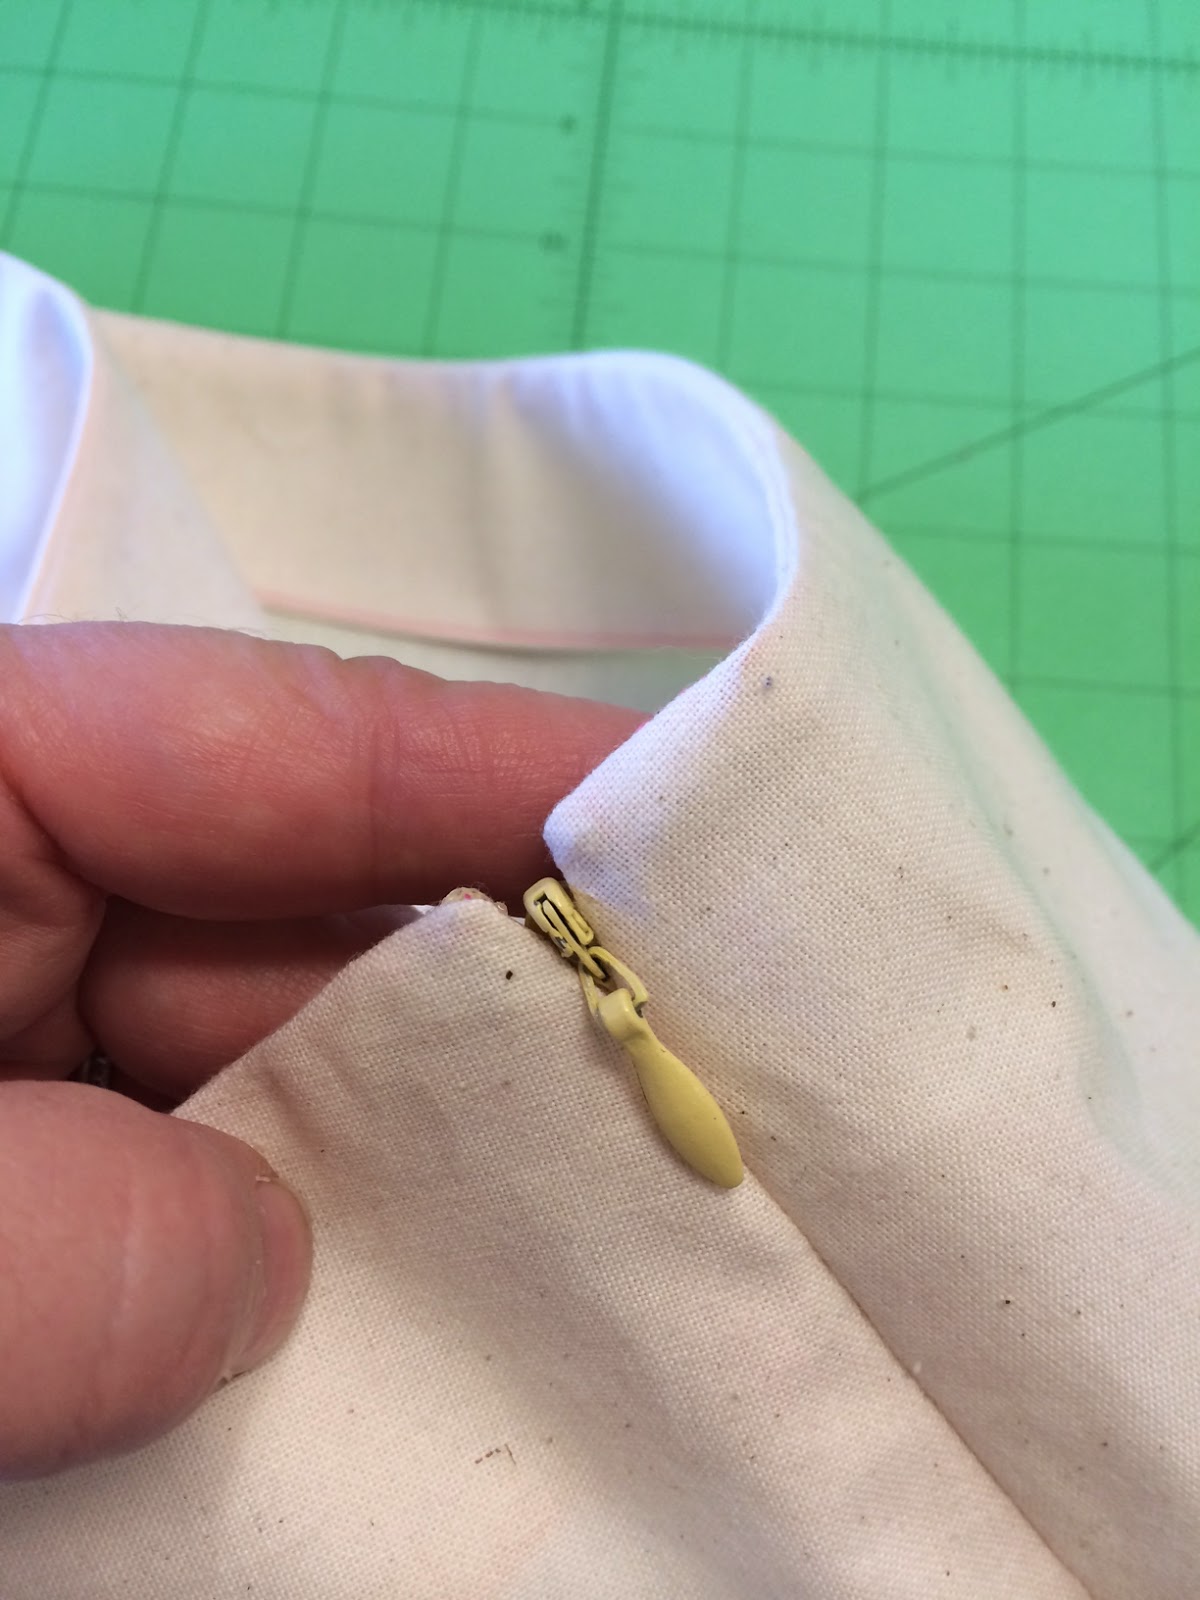 install an invisible zipper